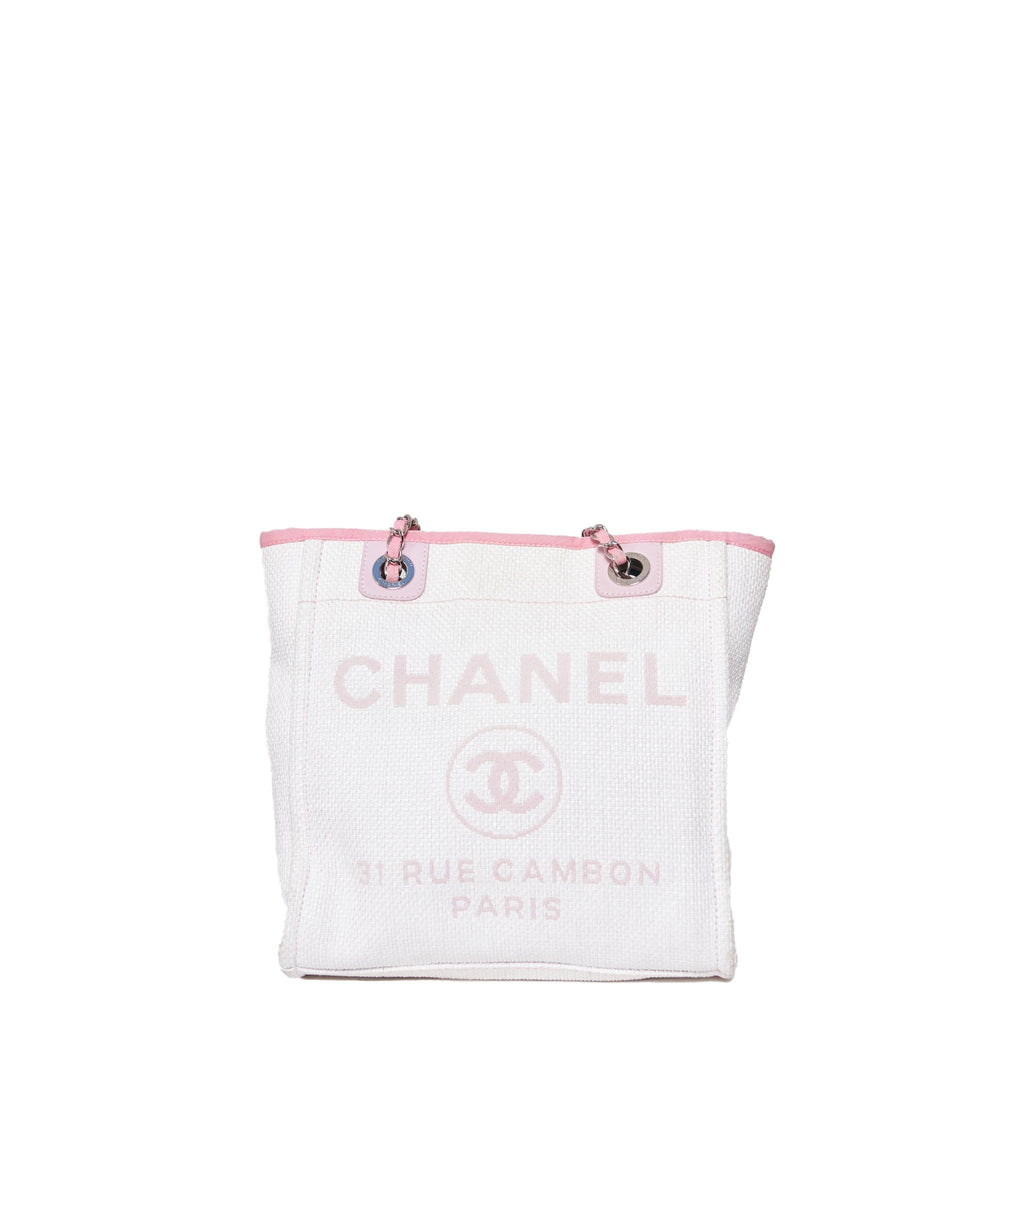 pink chanel deauville tote bag